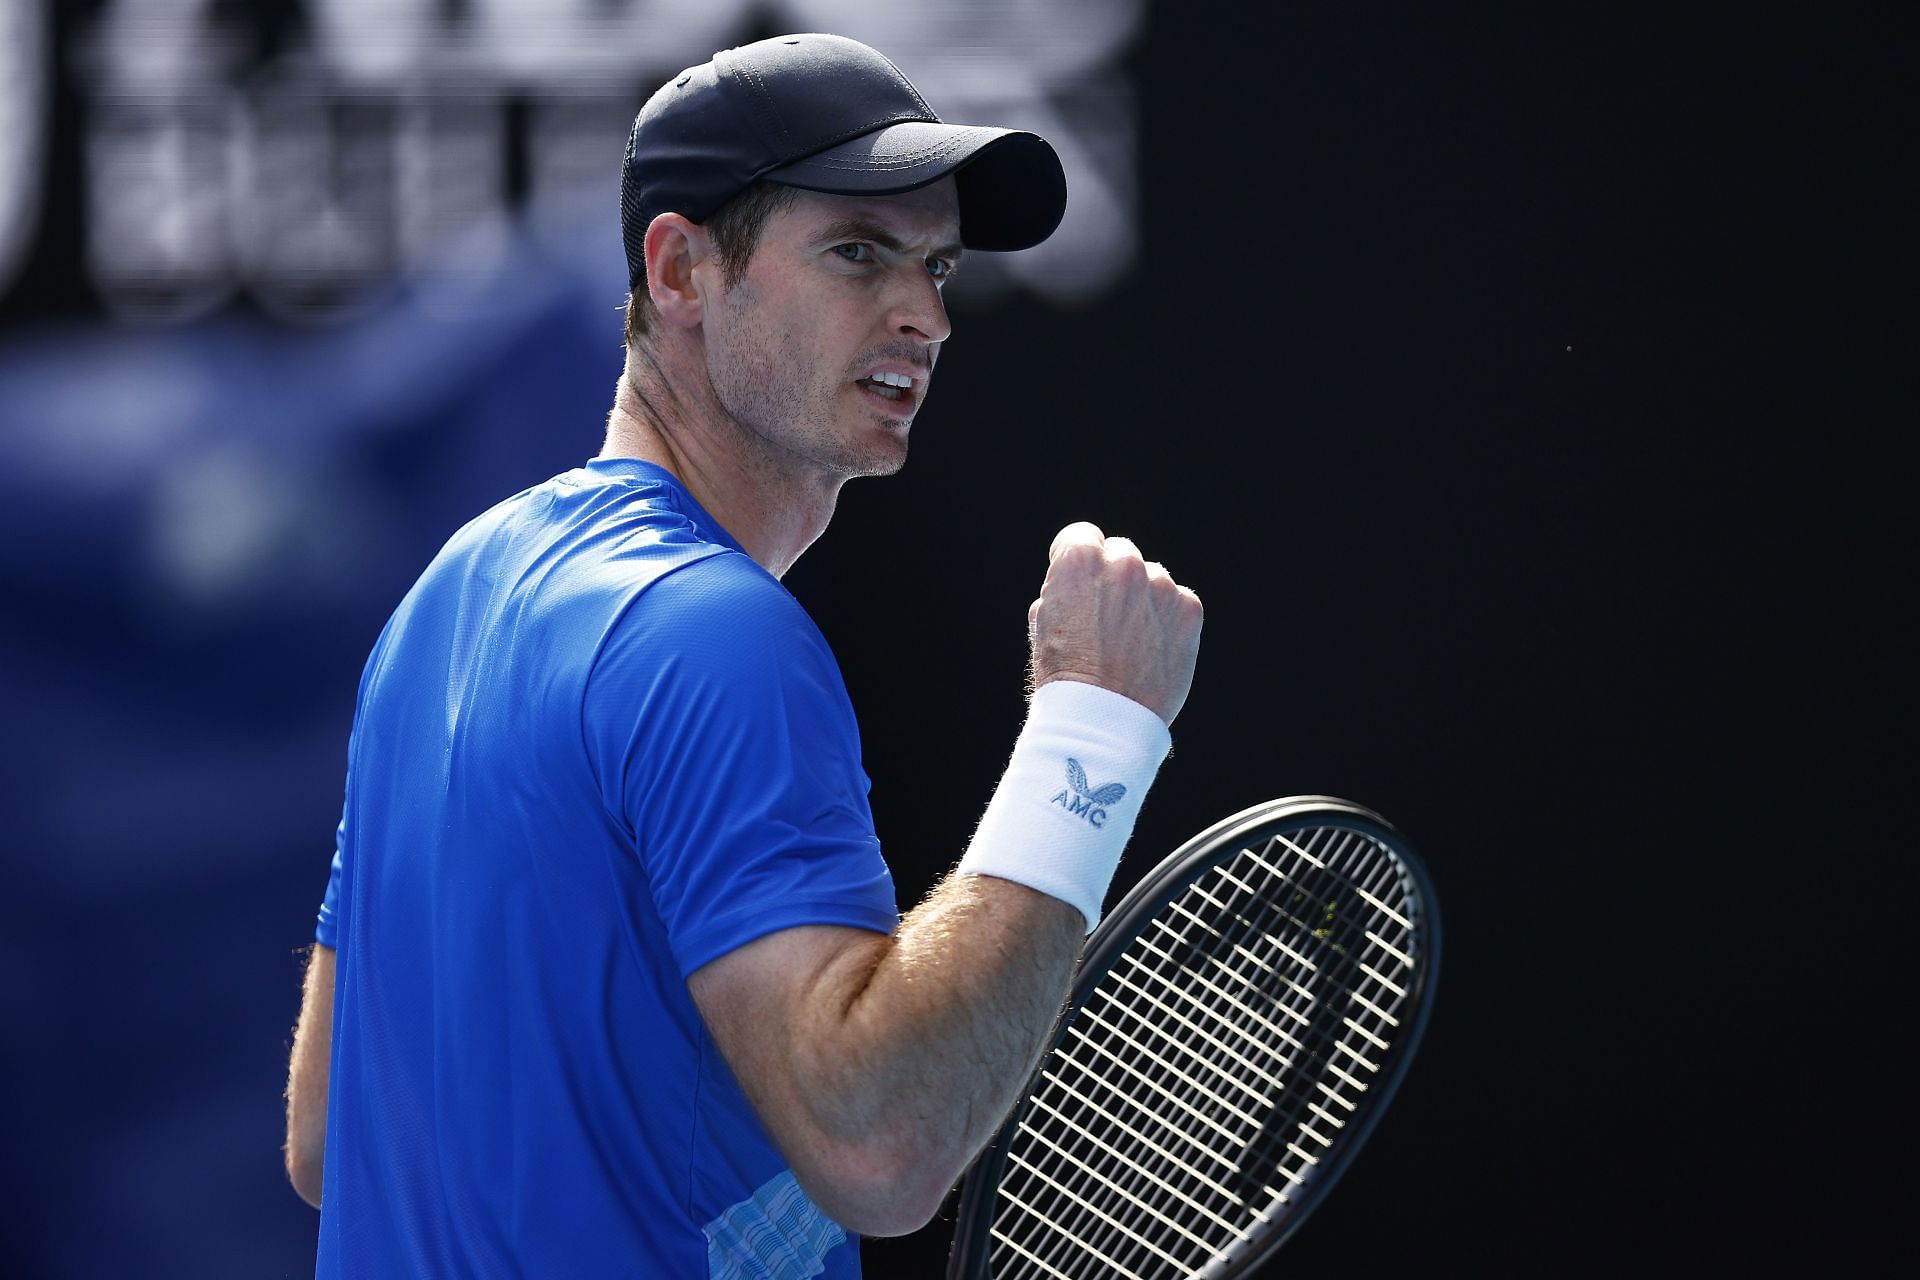 Andy Murray during his match at the 2022 Melbourne Summer Set: Day 2